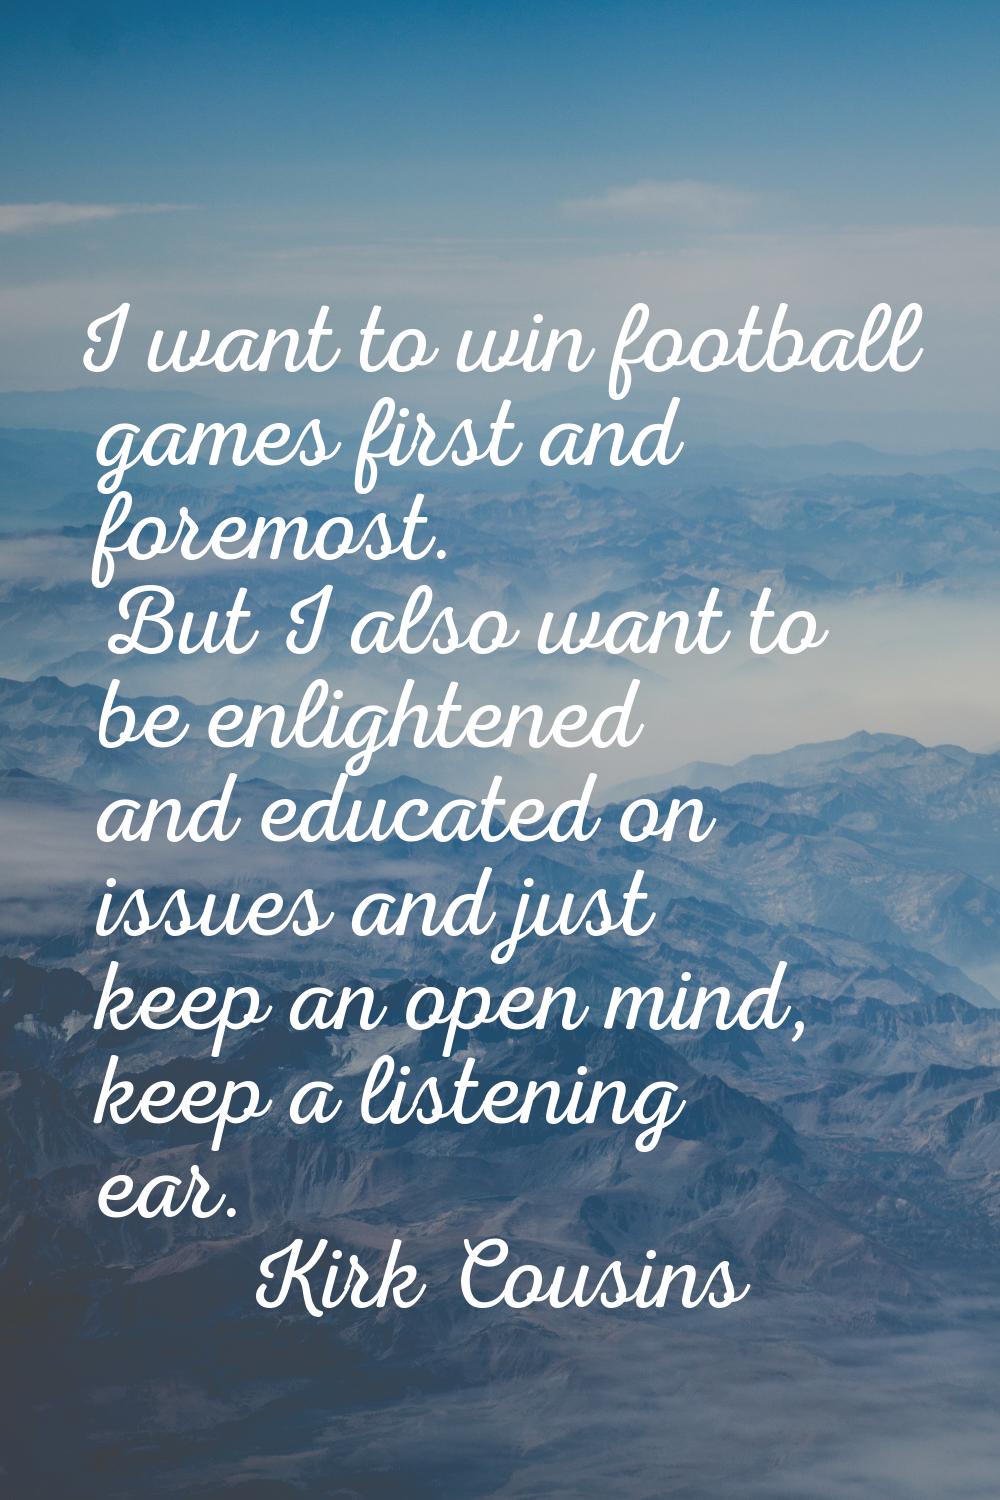 I want to win football games first and foremost. But I also want to be enlightened and educated on 